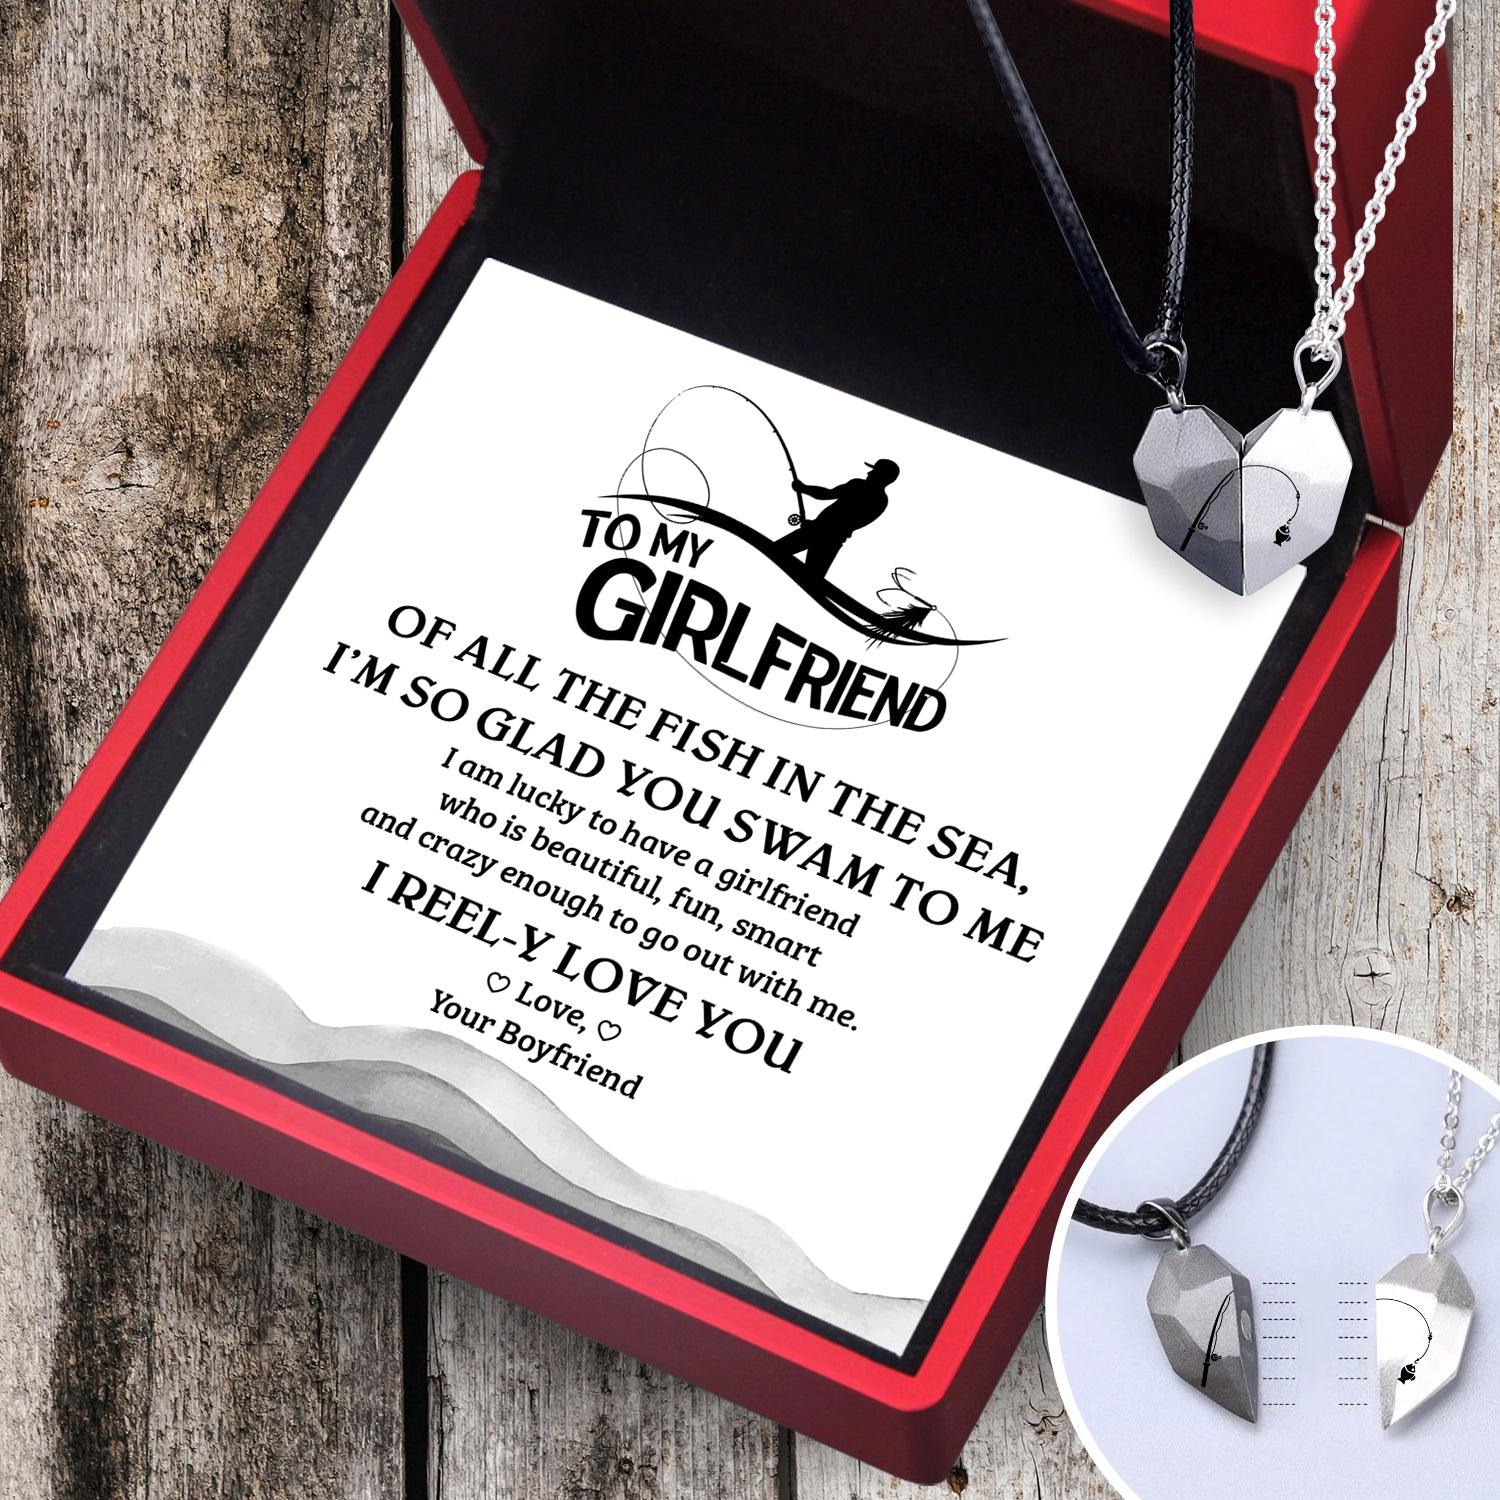 Magnetic Love Necklaces - Fishing - To My Girlfriend - I Reel-y